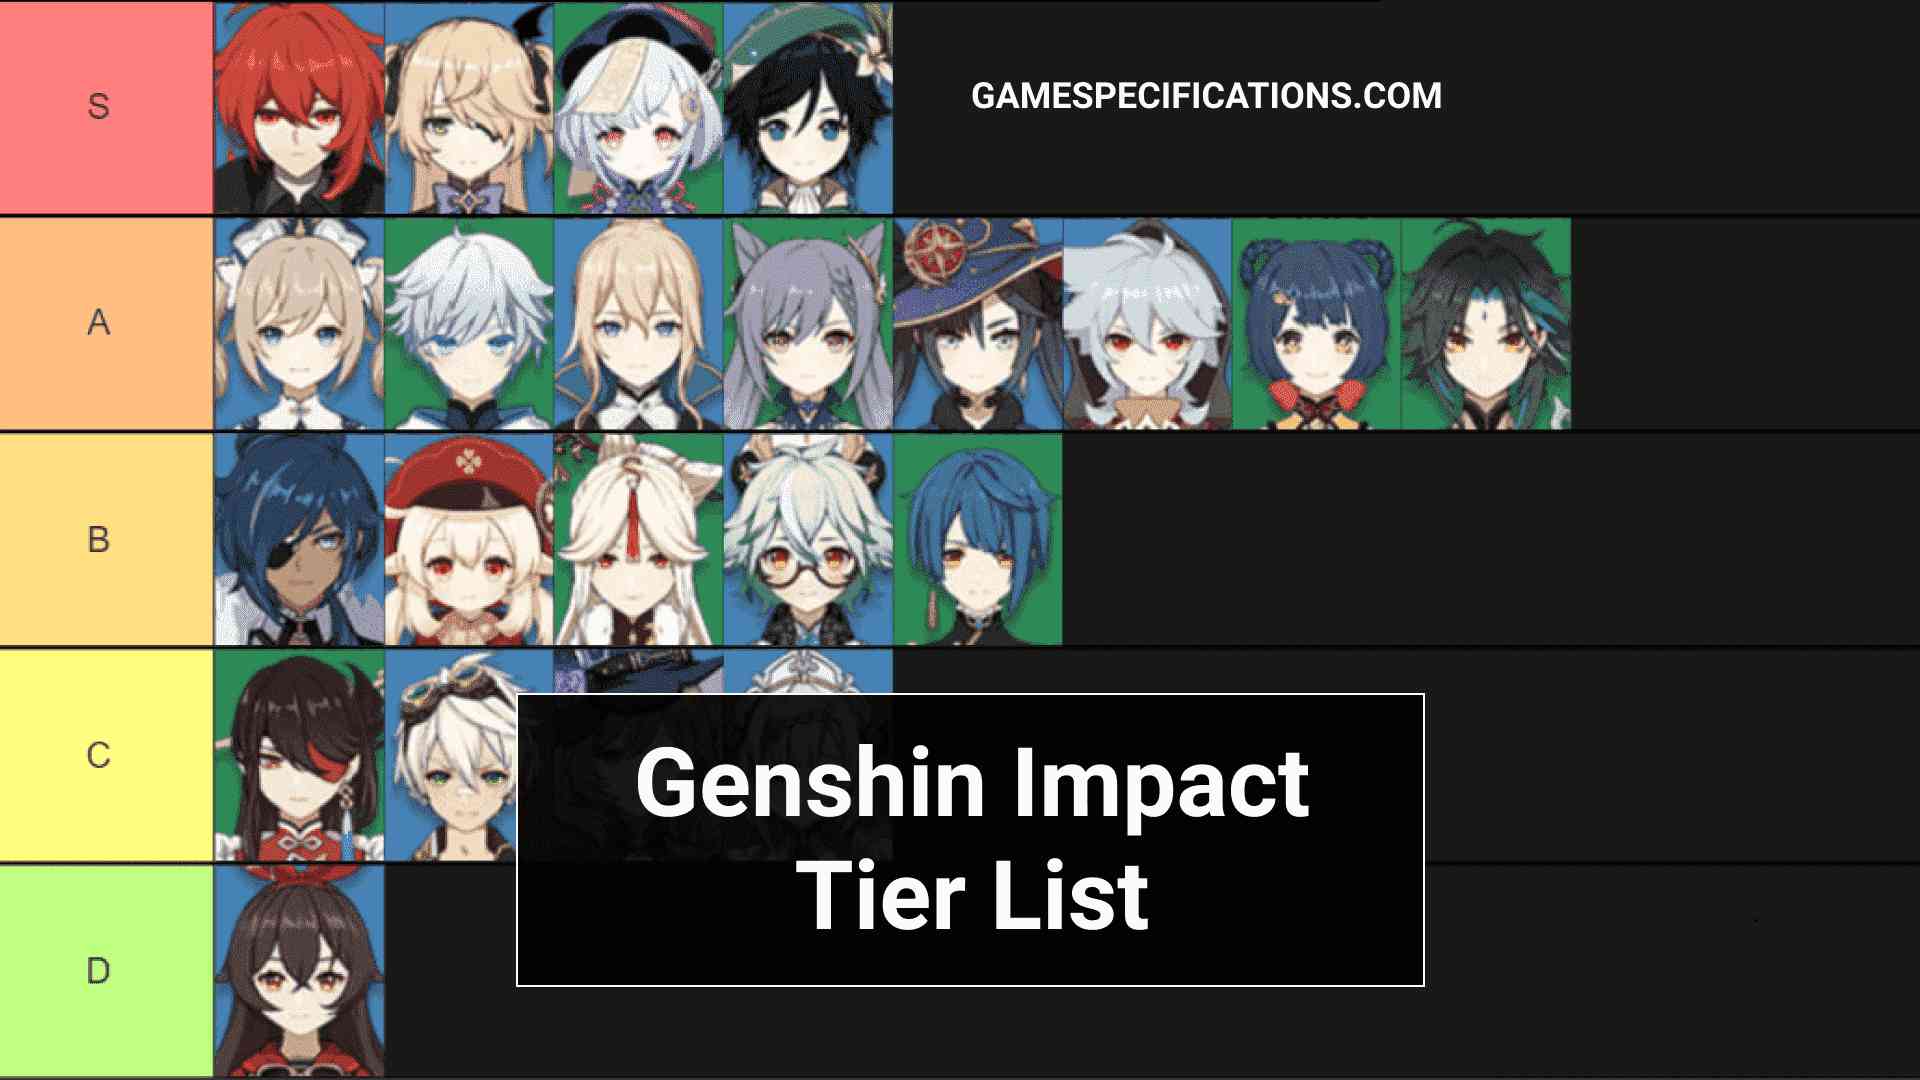 Genshin Impact Tier List – All Characters From S-Tier To C-Tier